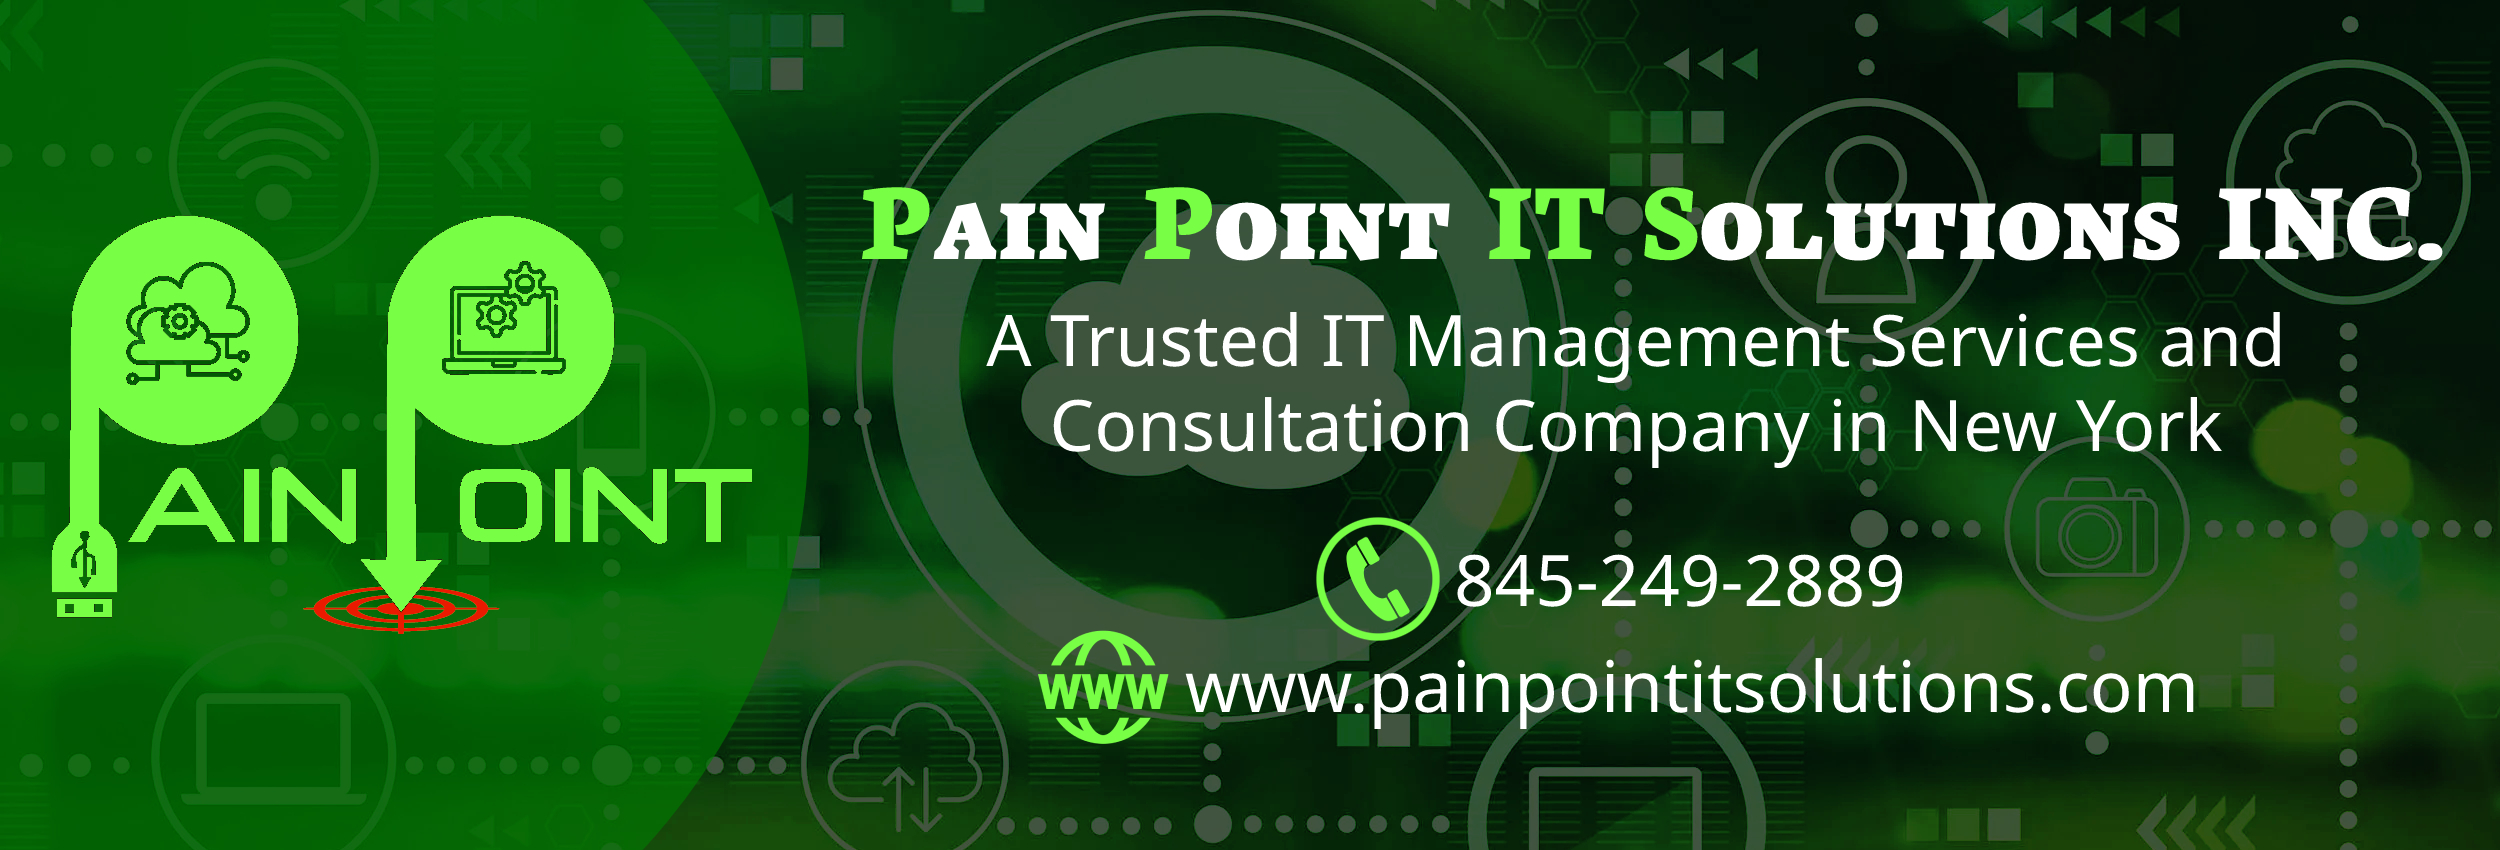 Pain Point IT Solutions Inc.